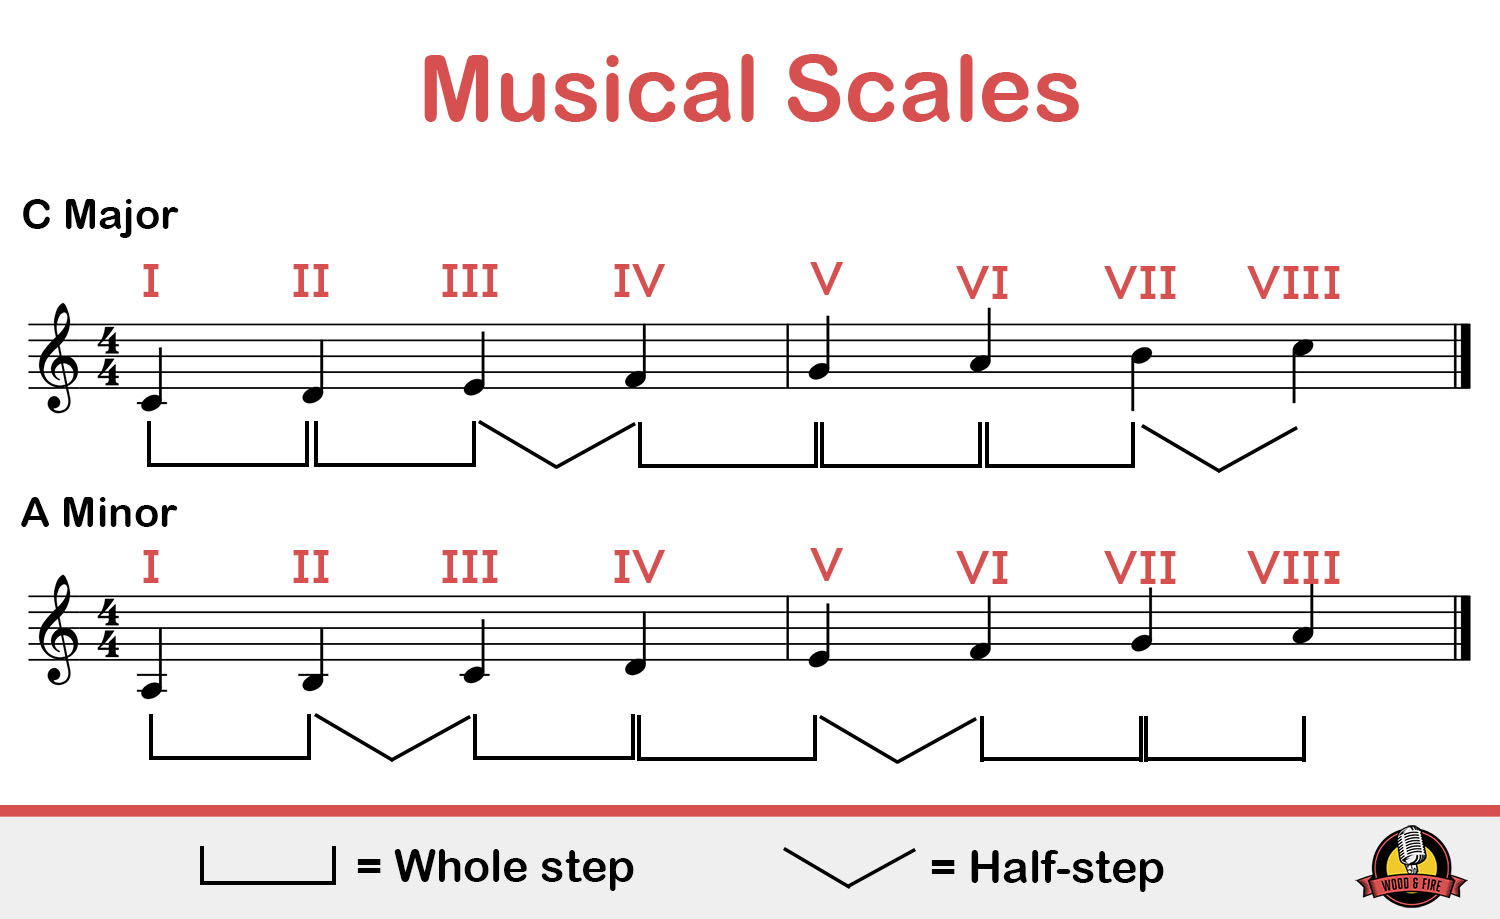 What are scales?